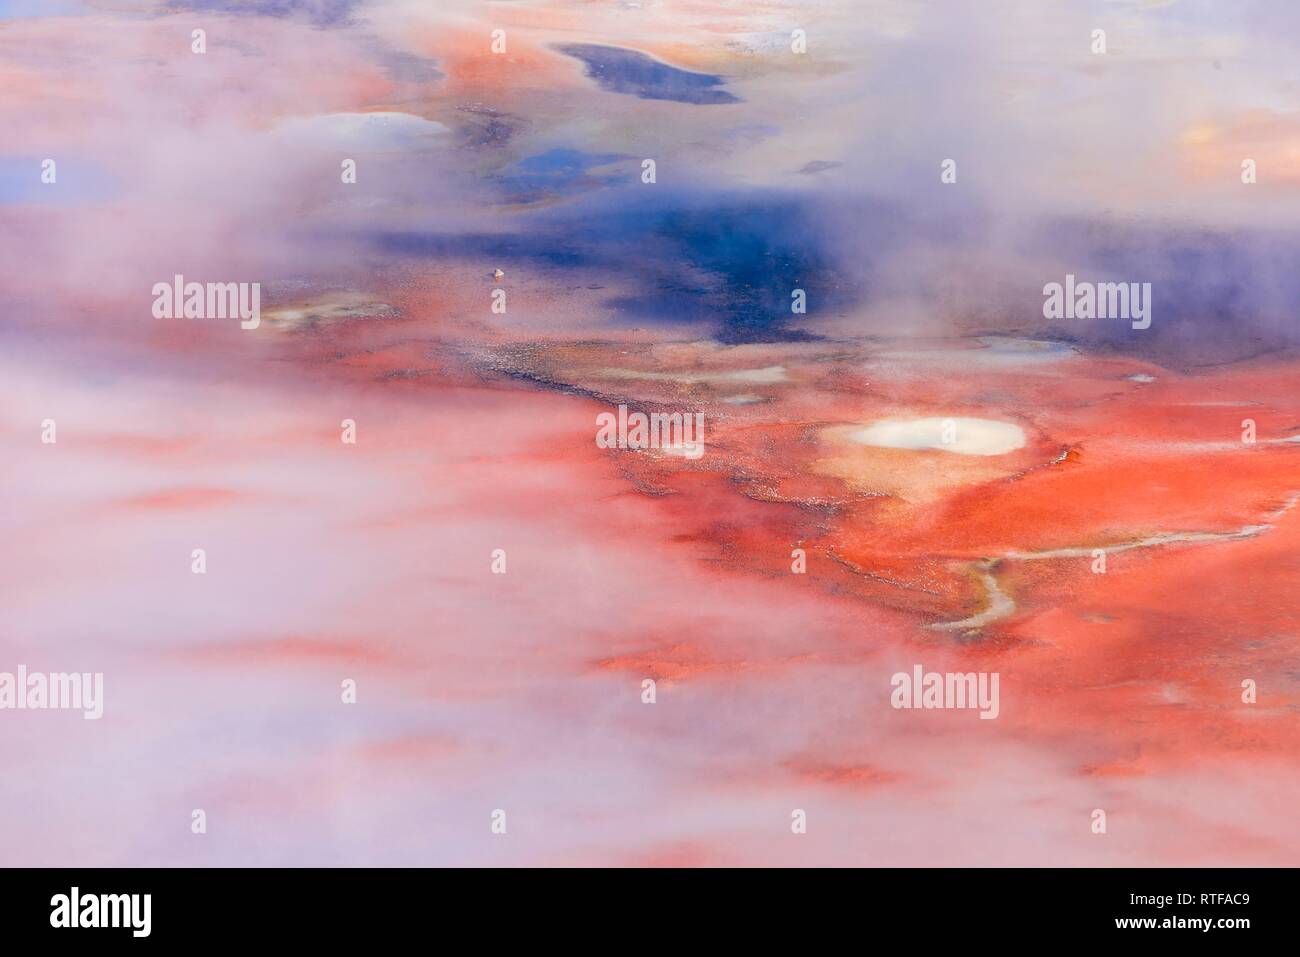 Abstract detail, hot springs, colorful mineral deposits in Porcelain Basin, Noris Geyser Basin, Yellowstone National Park Stock Photo